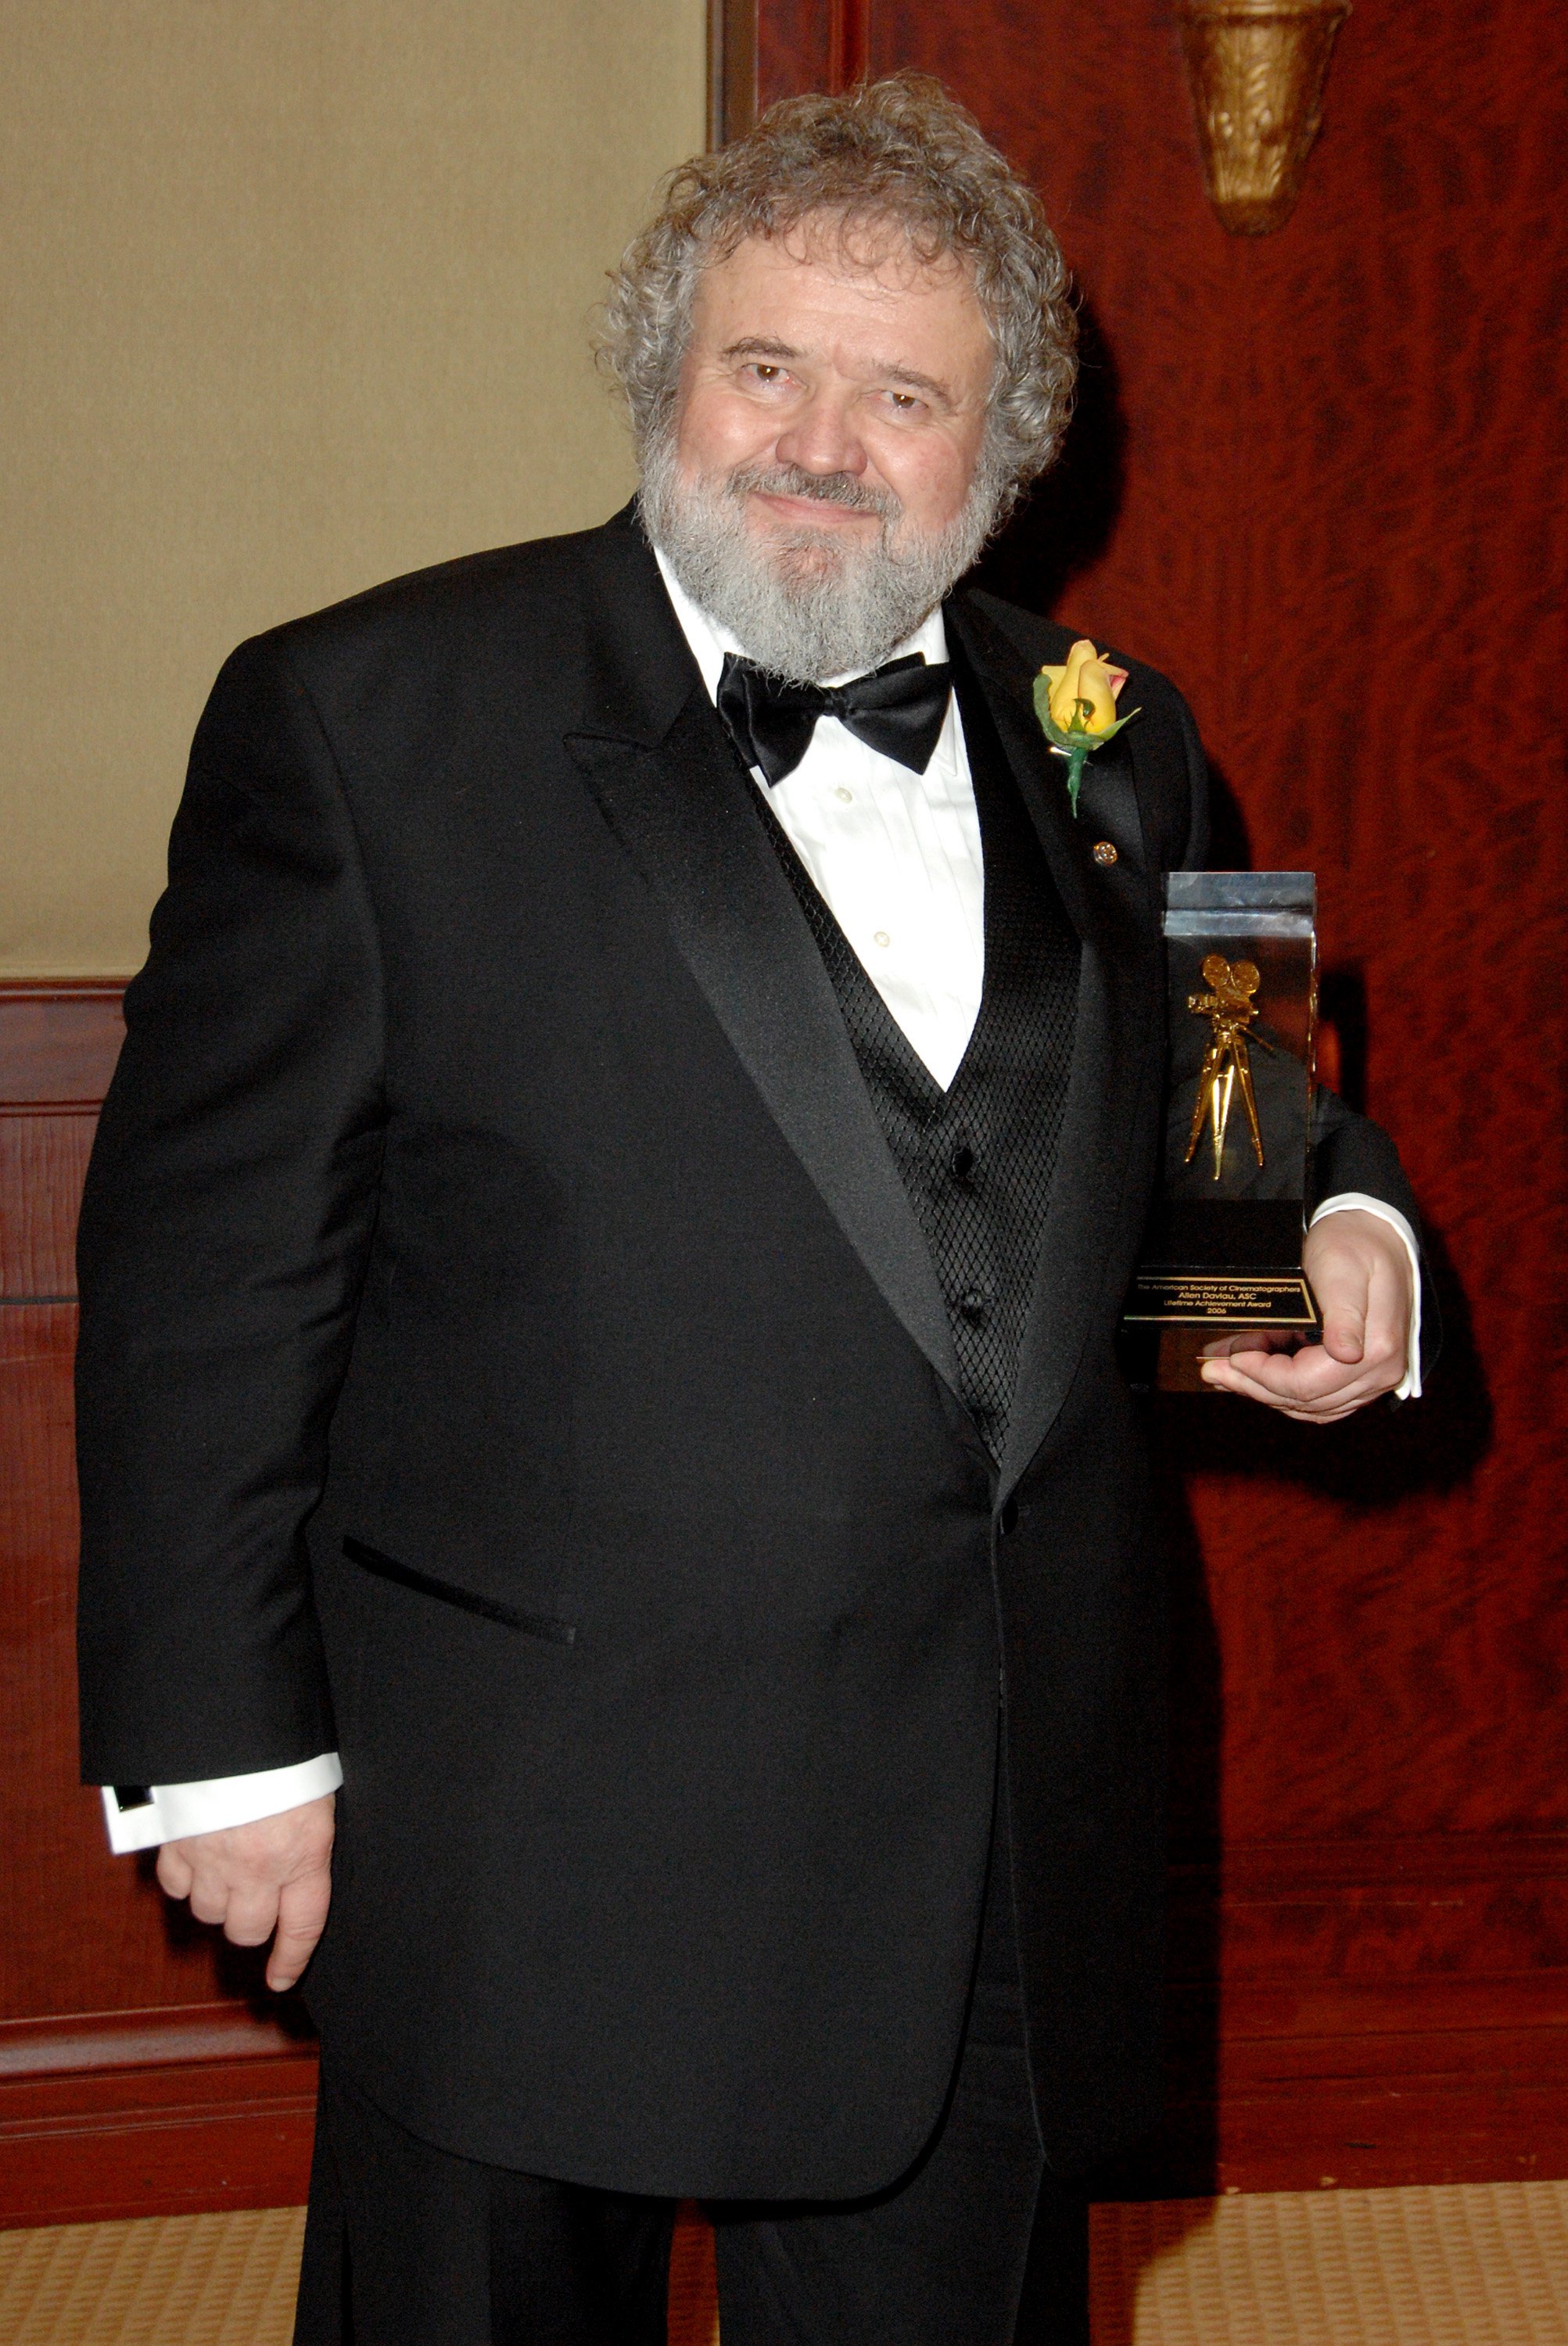 Allen Daviau during 21st Annual American Society Of Cinematographers Awards in February 2007, in Century City, California. | Source: Getty Images.